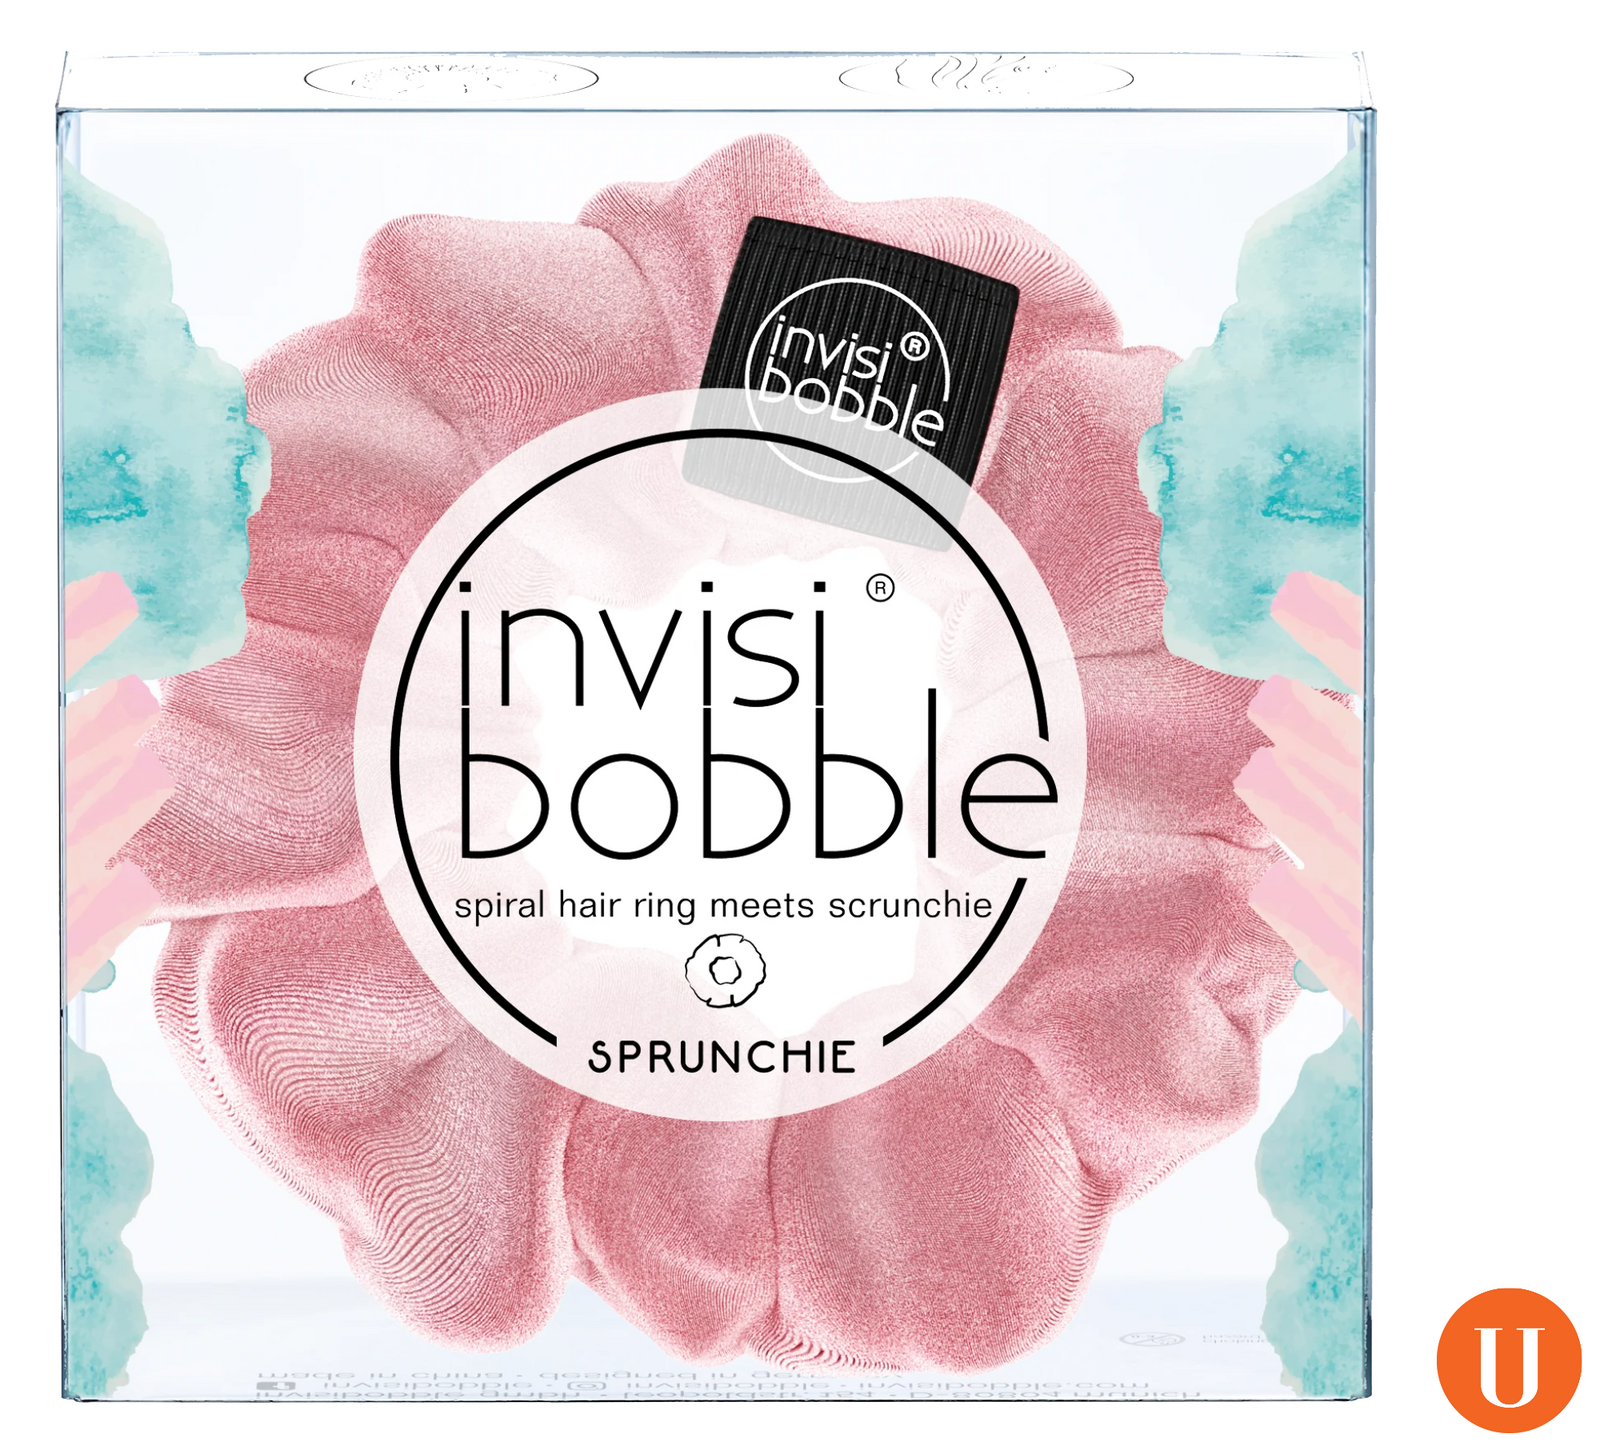 Amazon.com : invisibobble Sprunchie Spiral Hair Ring - Purrfection -  Scrunchie Stylish Bracelet, Strong Elastic Grip Coil Accessories for Women  - Gentle for Girls Teens and Thick Hair : Beauty & Personal Care